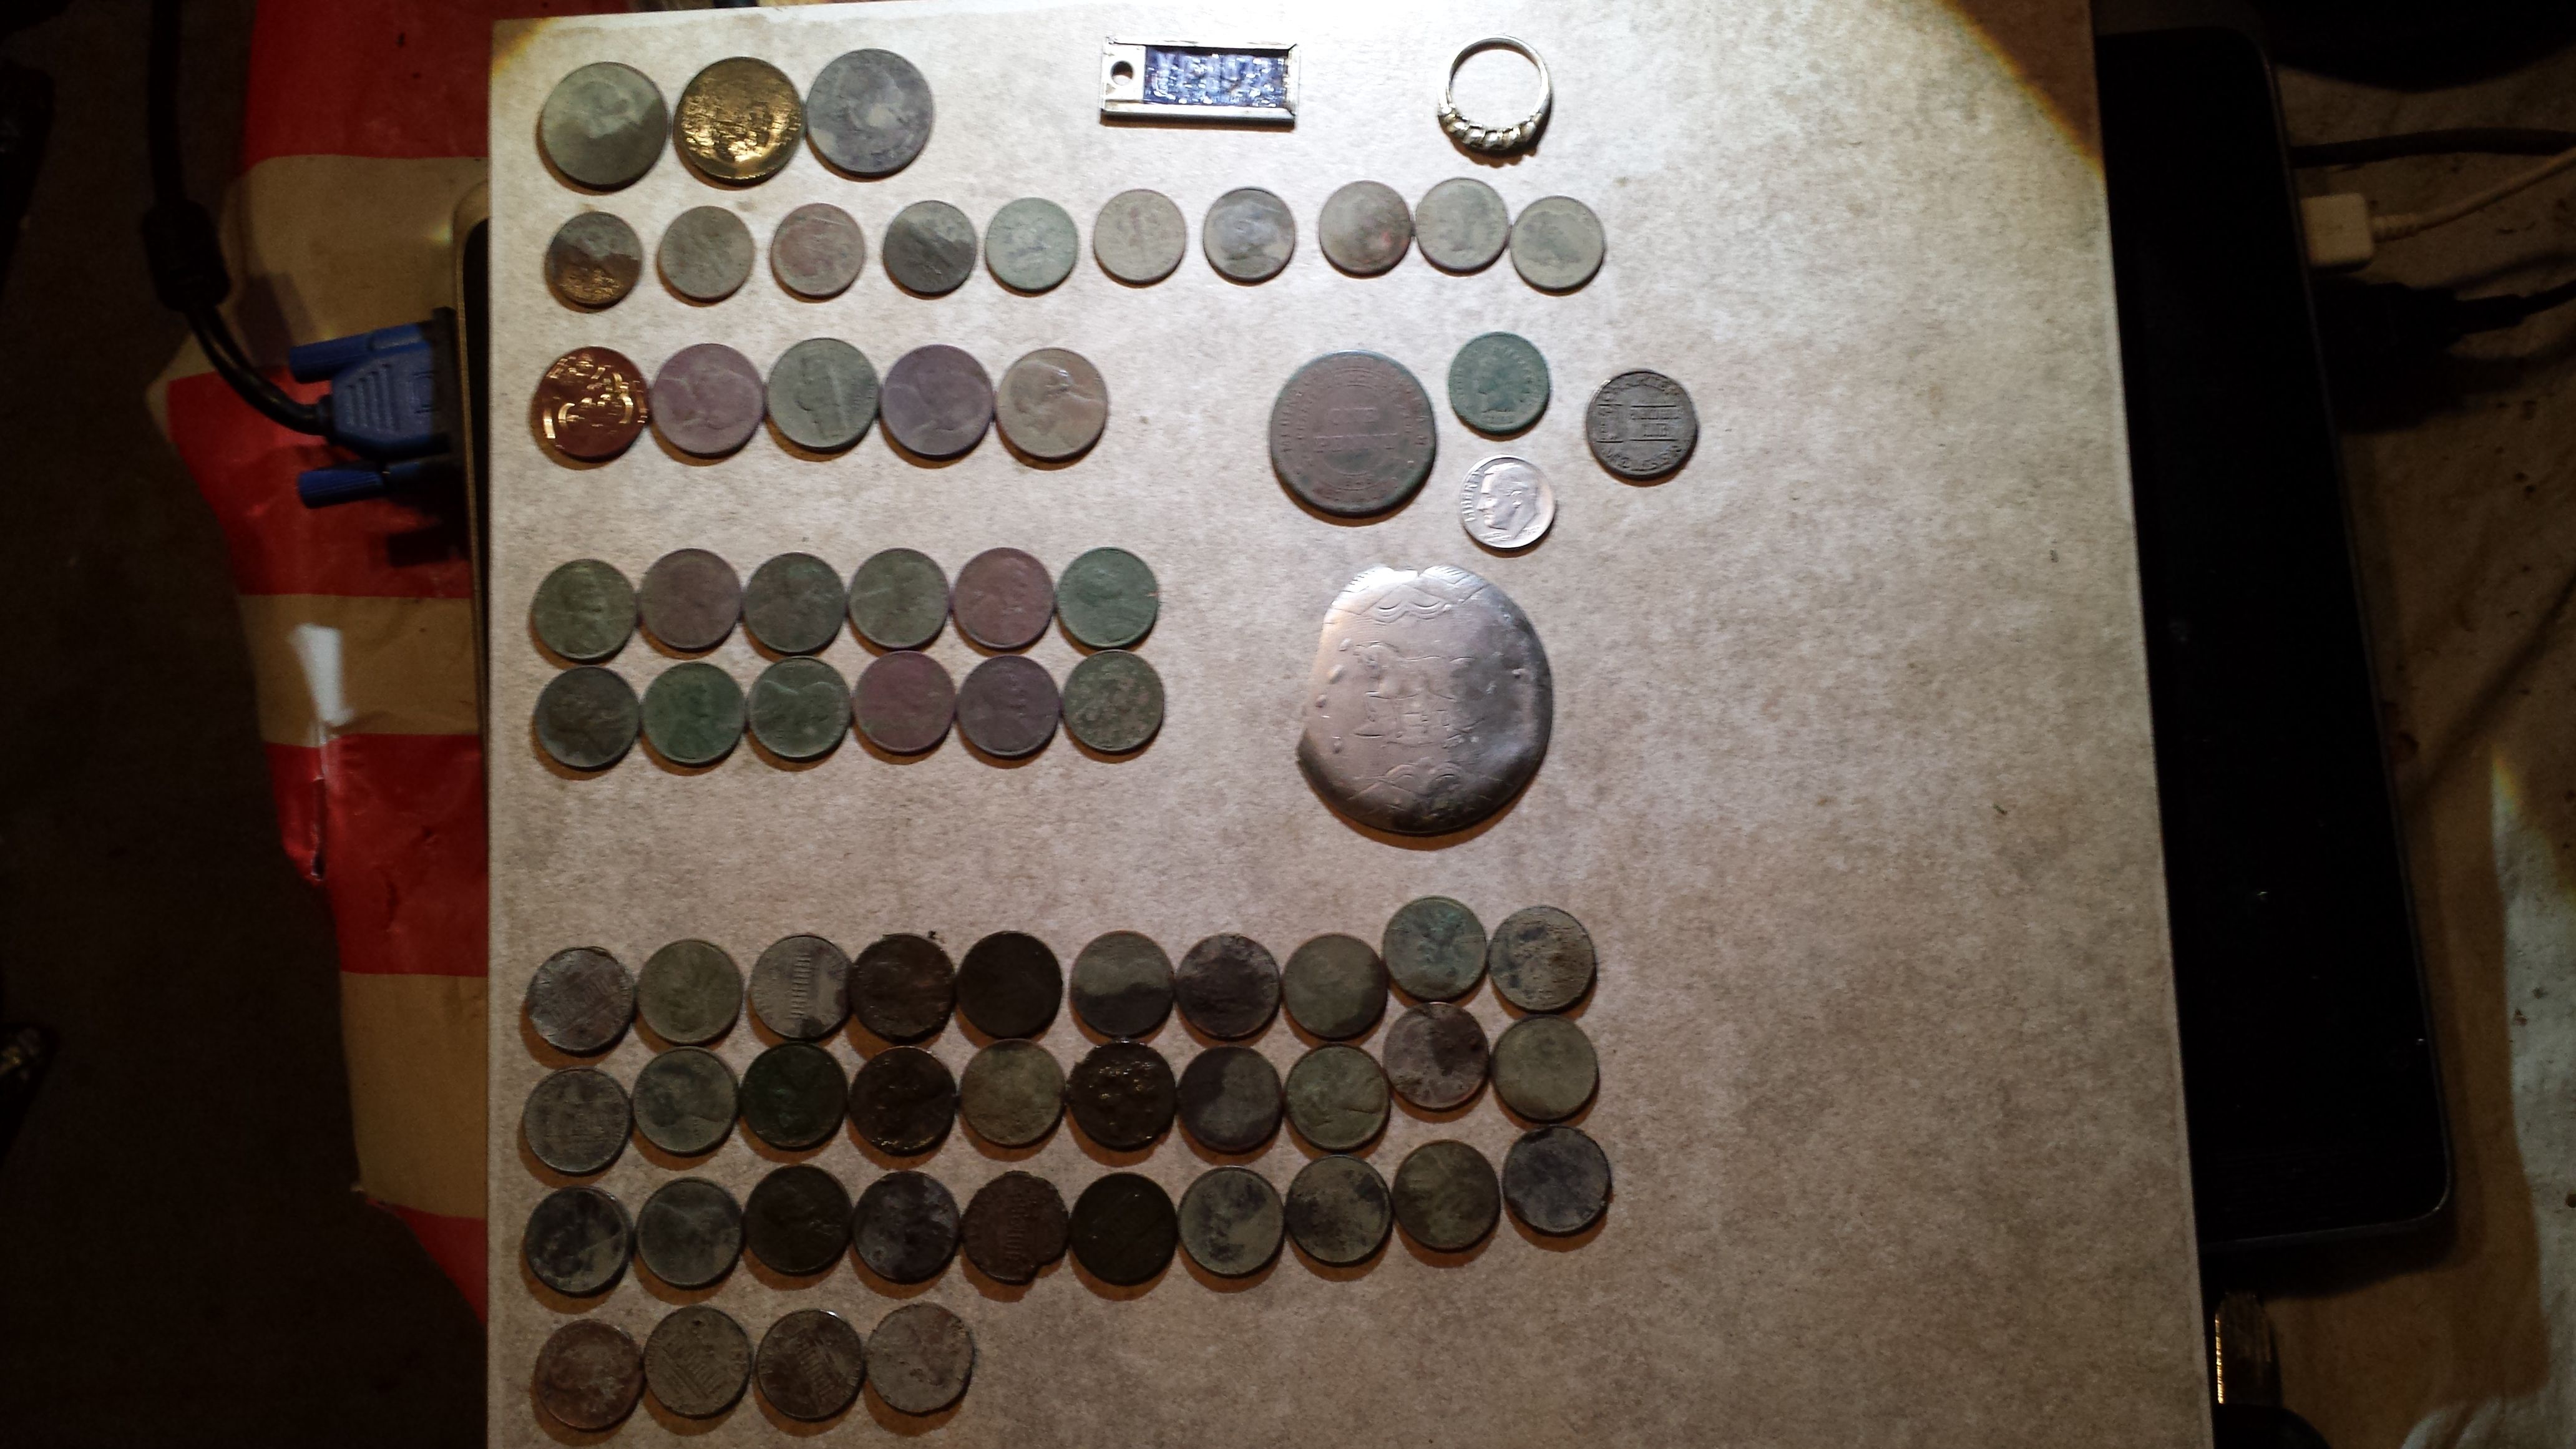 20151122 172349   Shawn's house coins and notables   1892 IHP, 1947D Rosie, Medina Masonic Penny Token, 12 wheats 1930, 37, 40x2, 41, 42, 44x2, 45, 46